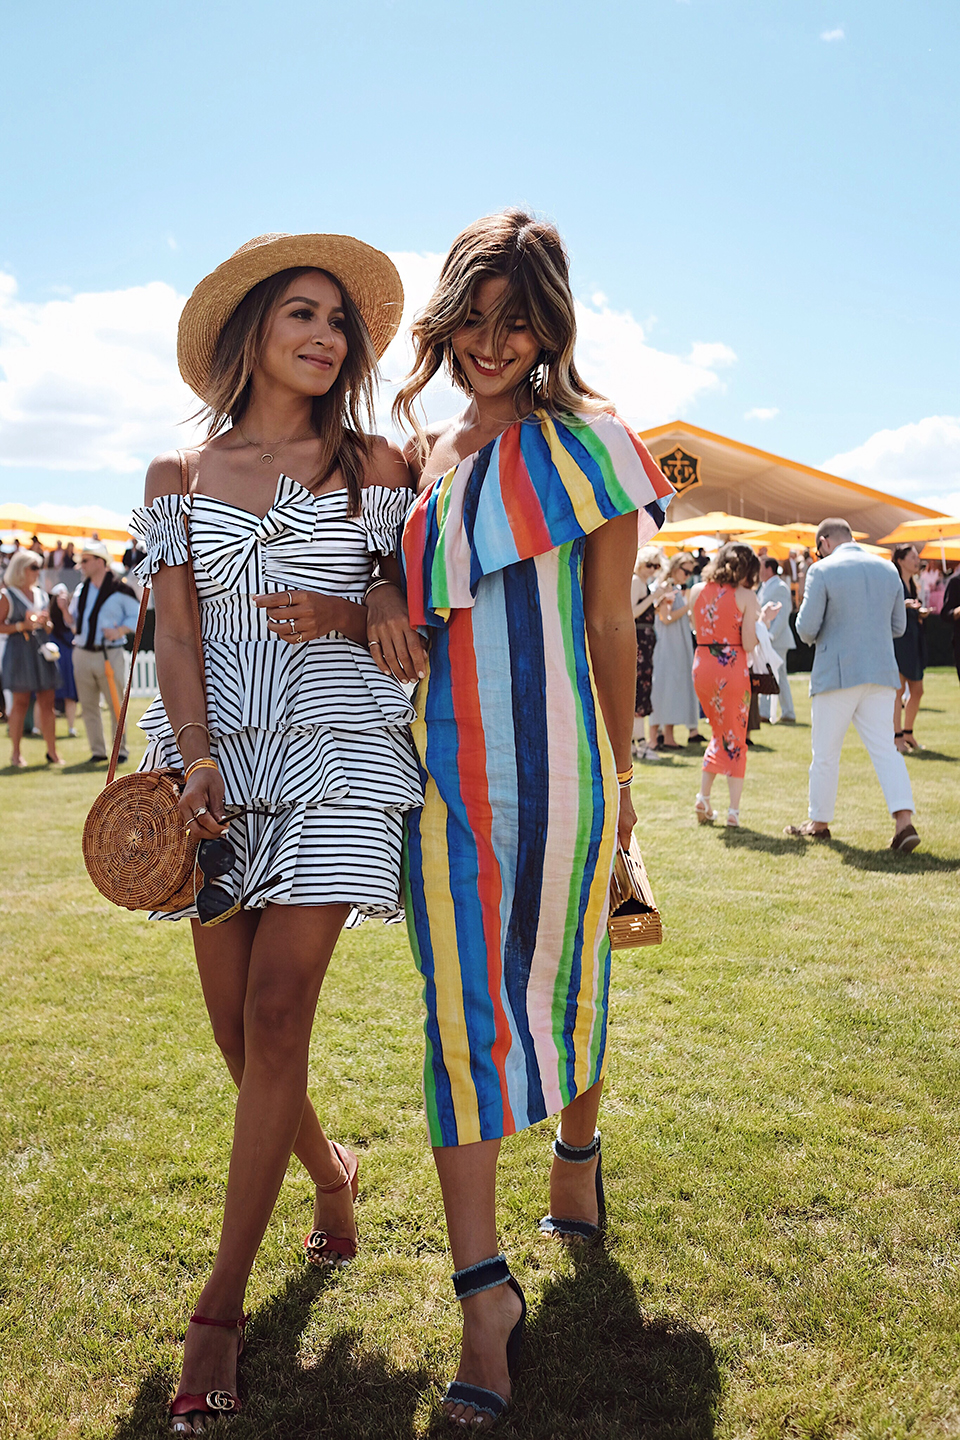 The Best Looks From the Veuve Clicquot Polo Classic - Racked NY